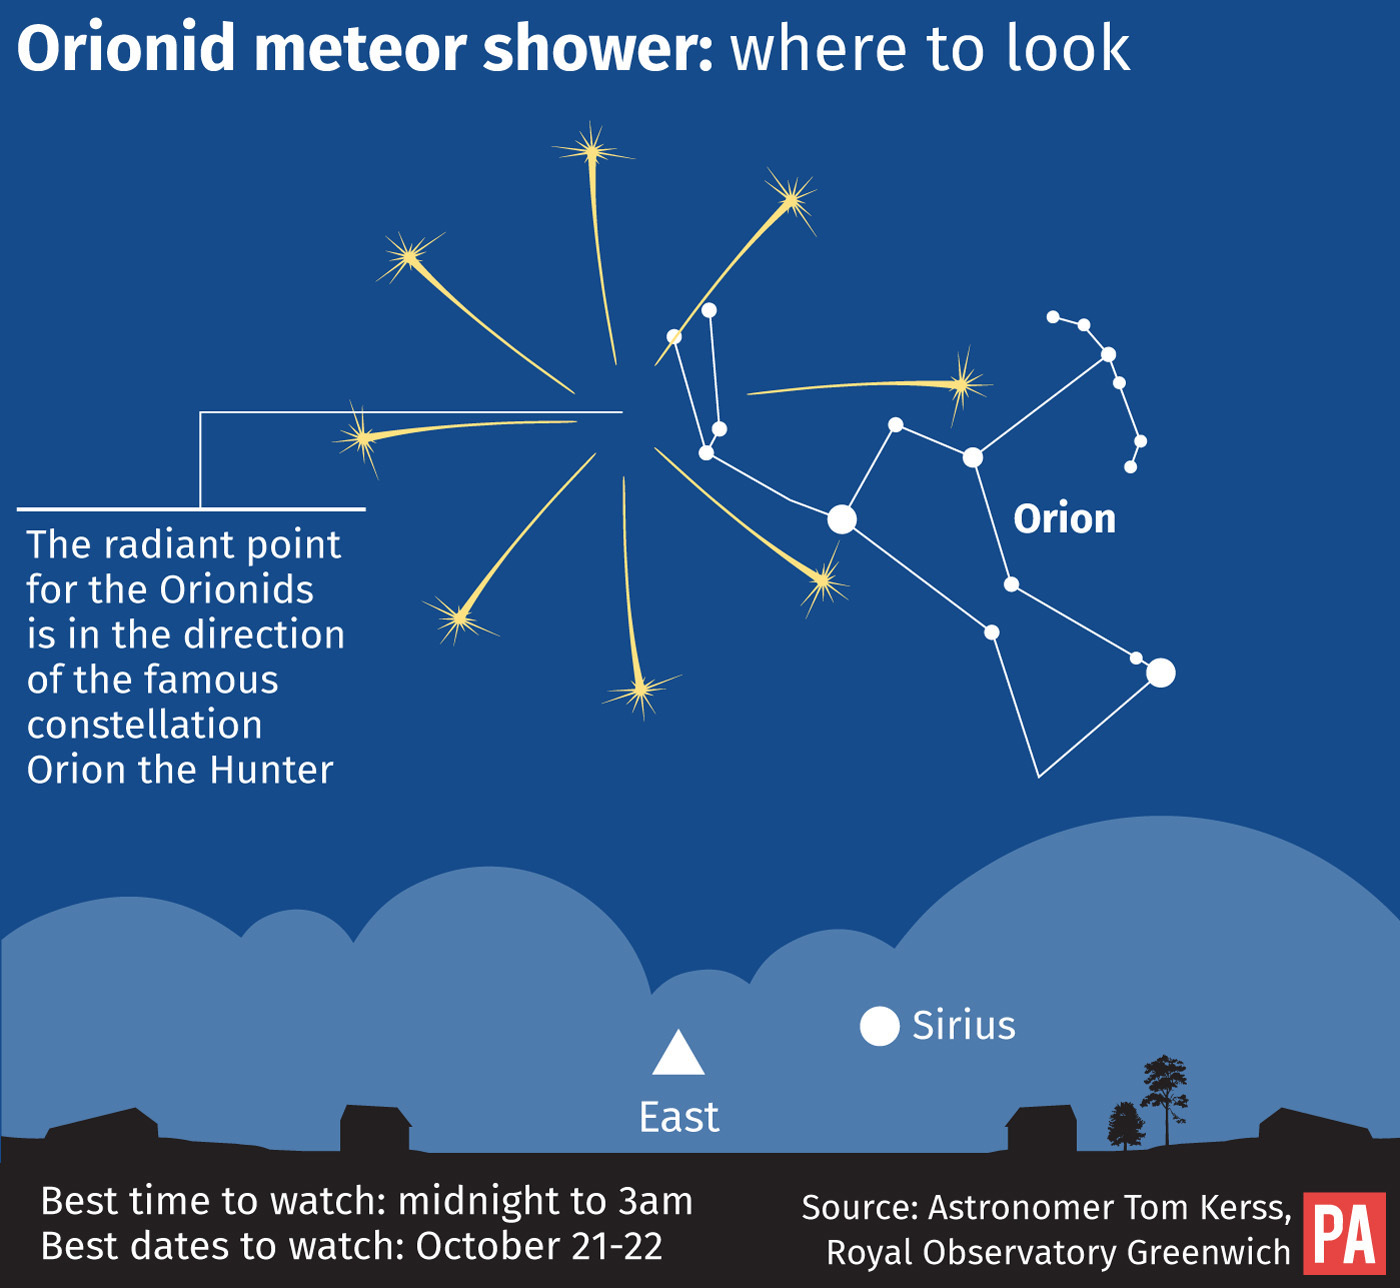 Everything you need to know about the Orionid meteor shower